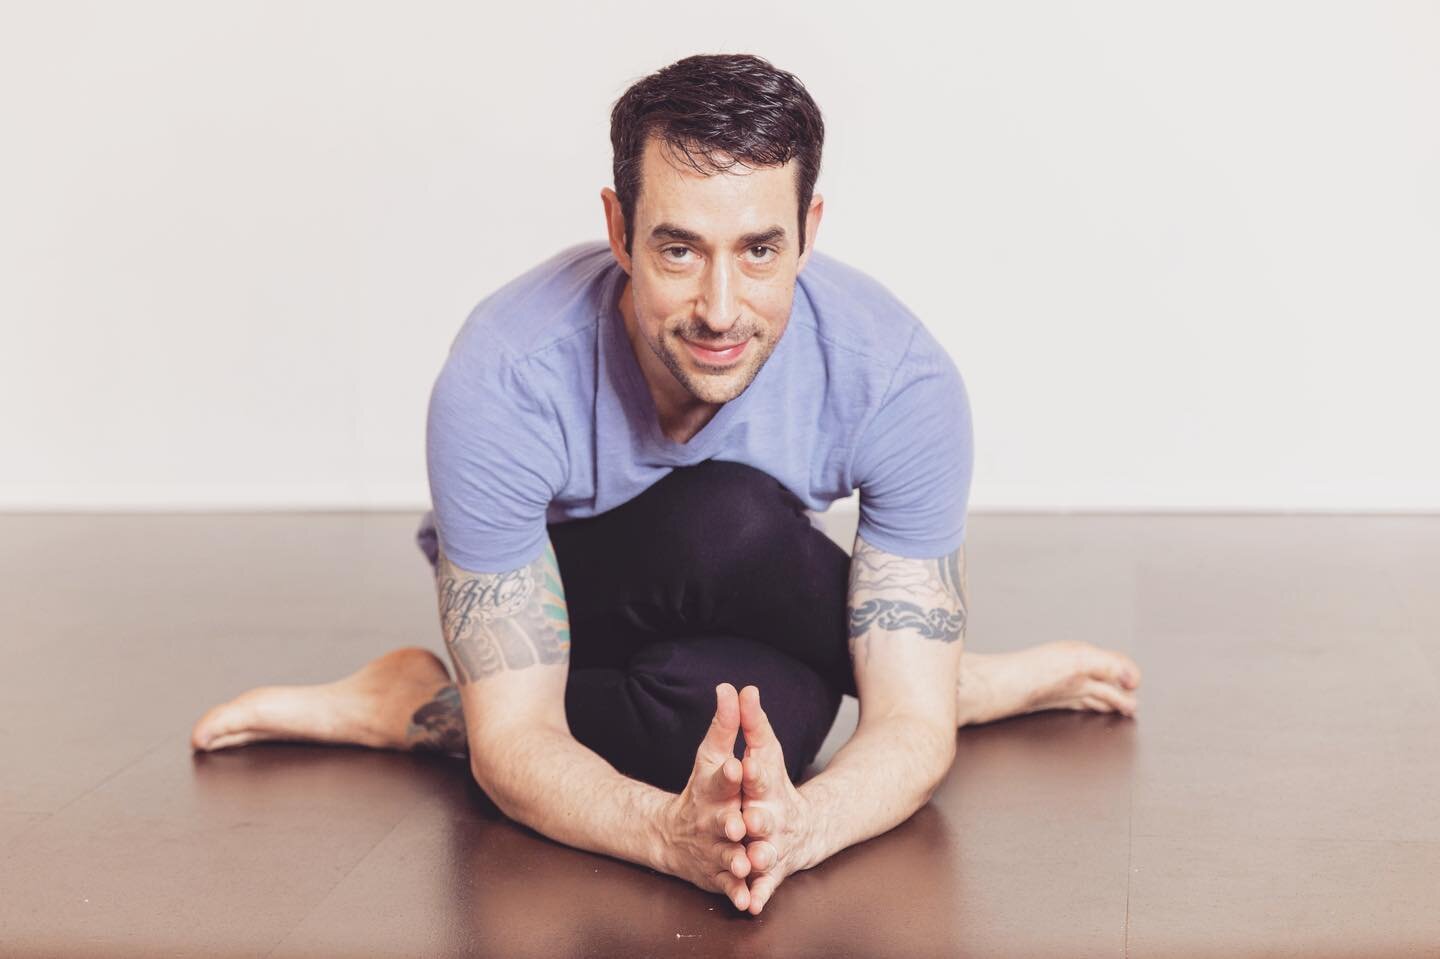 It&rsquo;s time for Monthly Yin with @bchused

Join Ben on Thursday, May 11th at 6:30 PM

Yin yoga can help you:
target deep layers of connective tissue 
increase circulation 
improve flexibility 
and restore the natural mobility of the joints 

Join